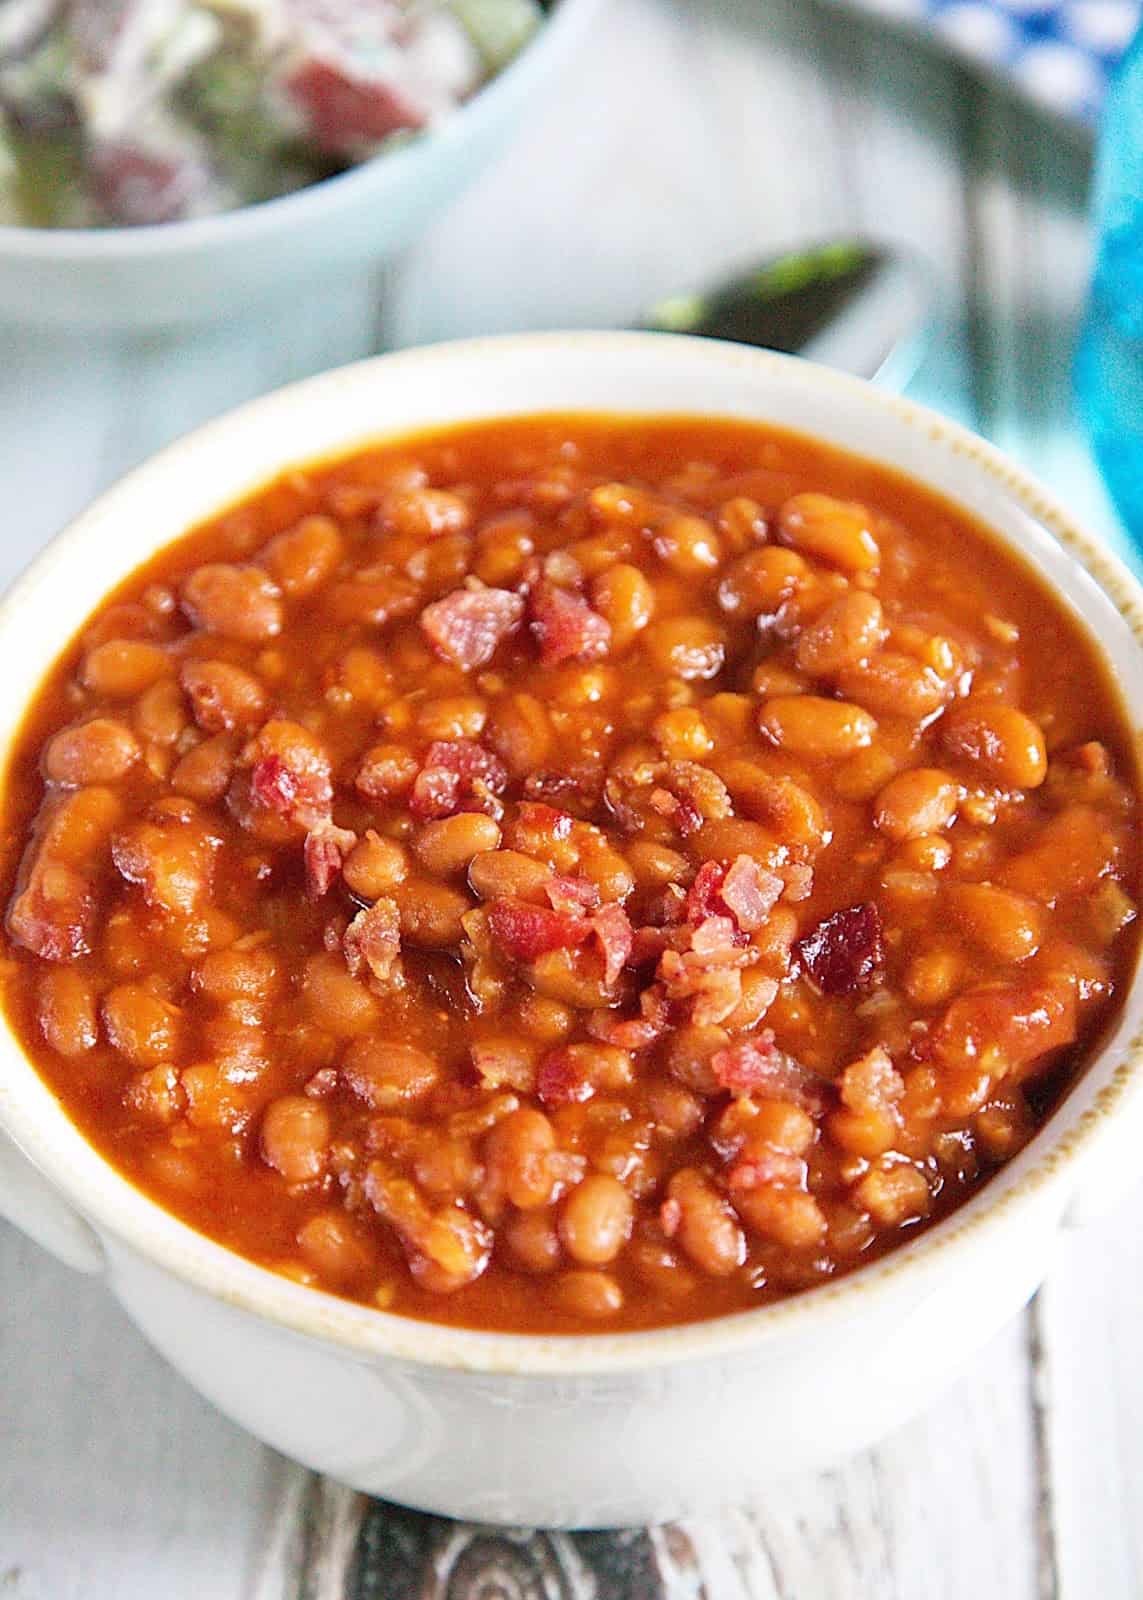 Quick Baked Beans Recipe - Pork and Beans, ketchup, mustard, onions, brown sugar and bacon. Just dump everything in a pan, bring to a boil and then simmer for 10 minutes. SO easy! They also tasted great! I thought they were some of the best we've made. 